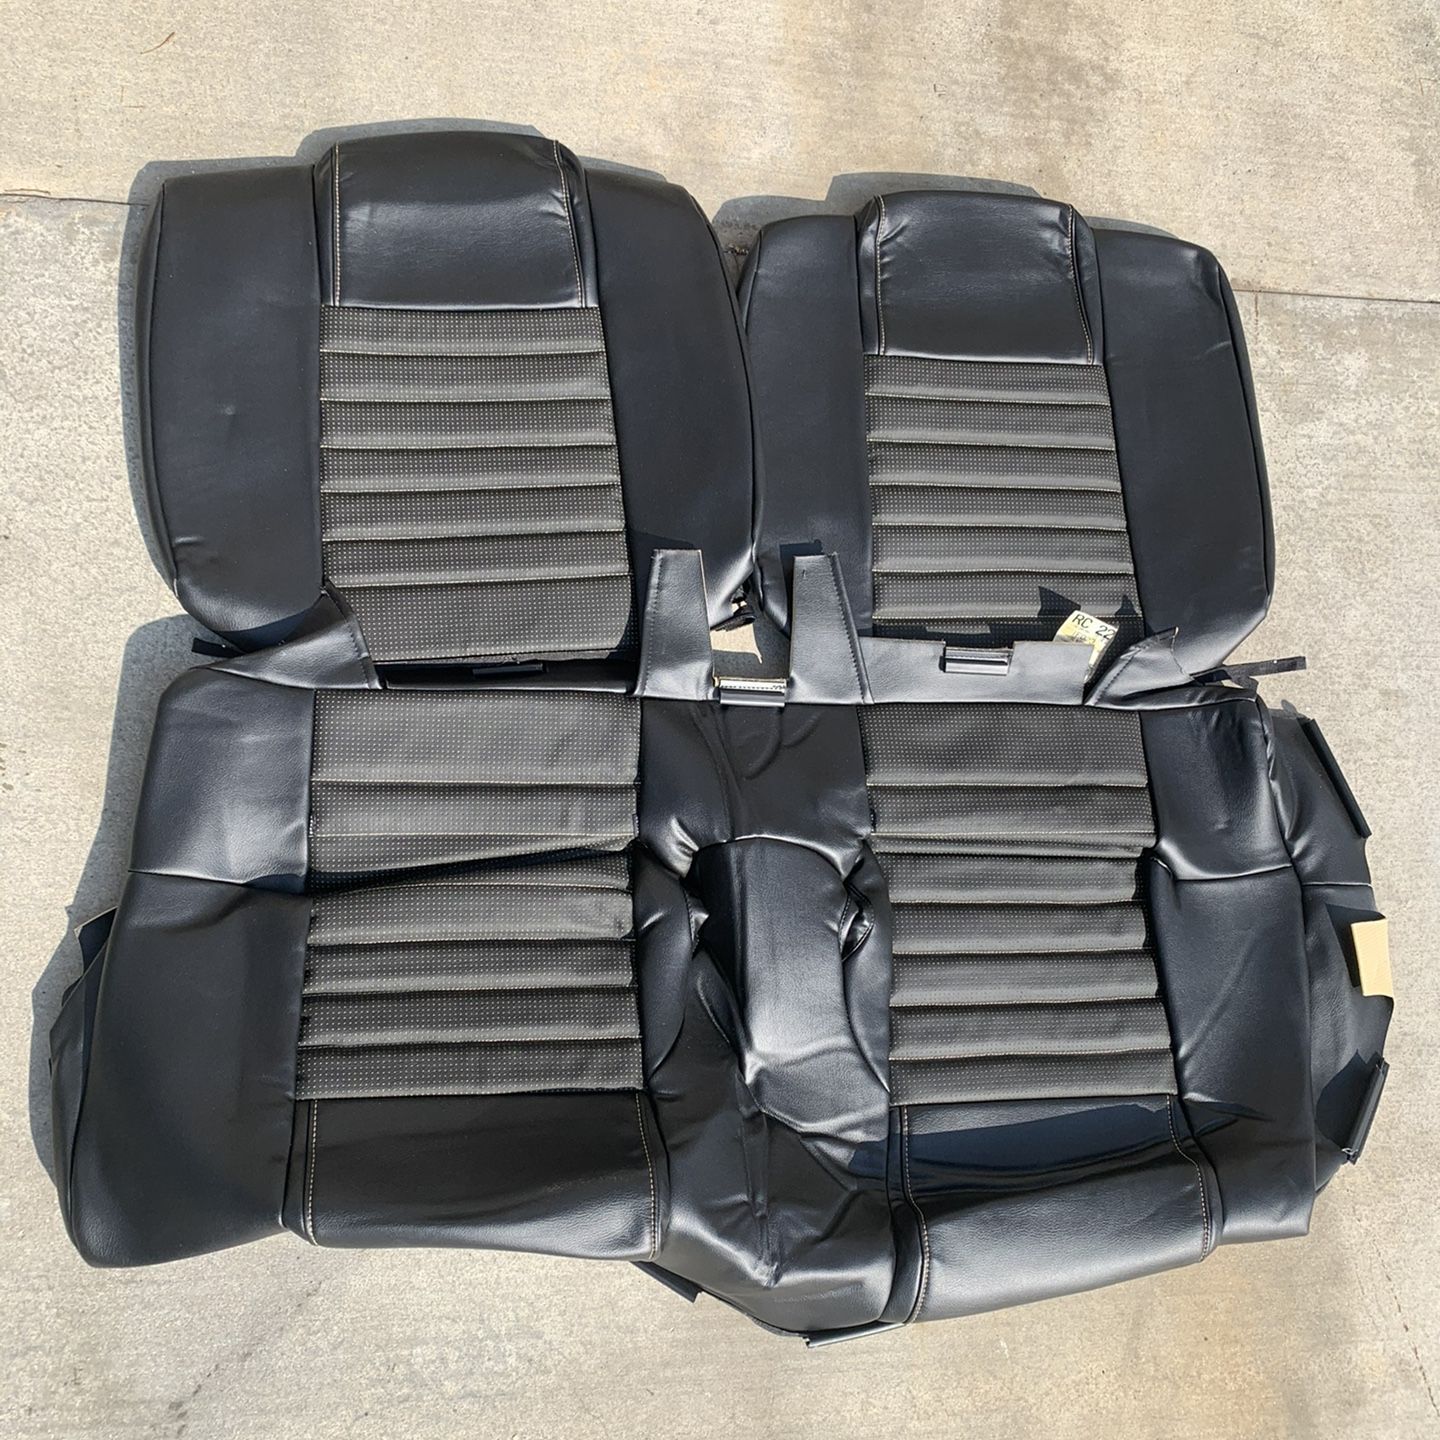 OEM Seat Cover Replacements, Chevrolet Camaro, Ford Mustang, Dodge Challenger